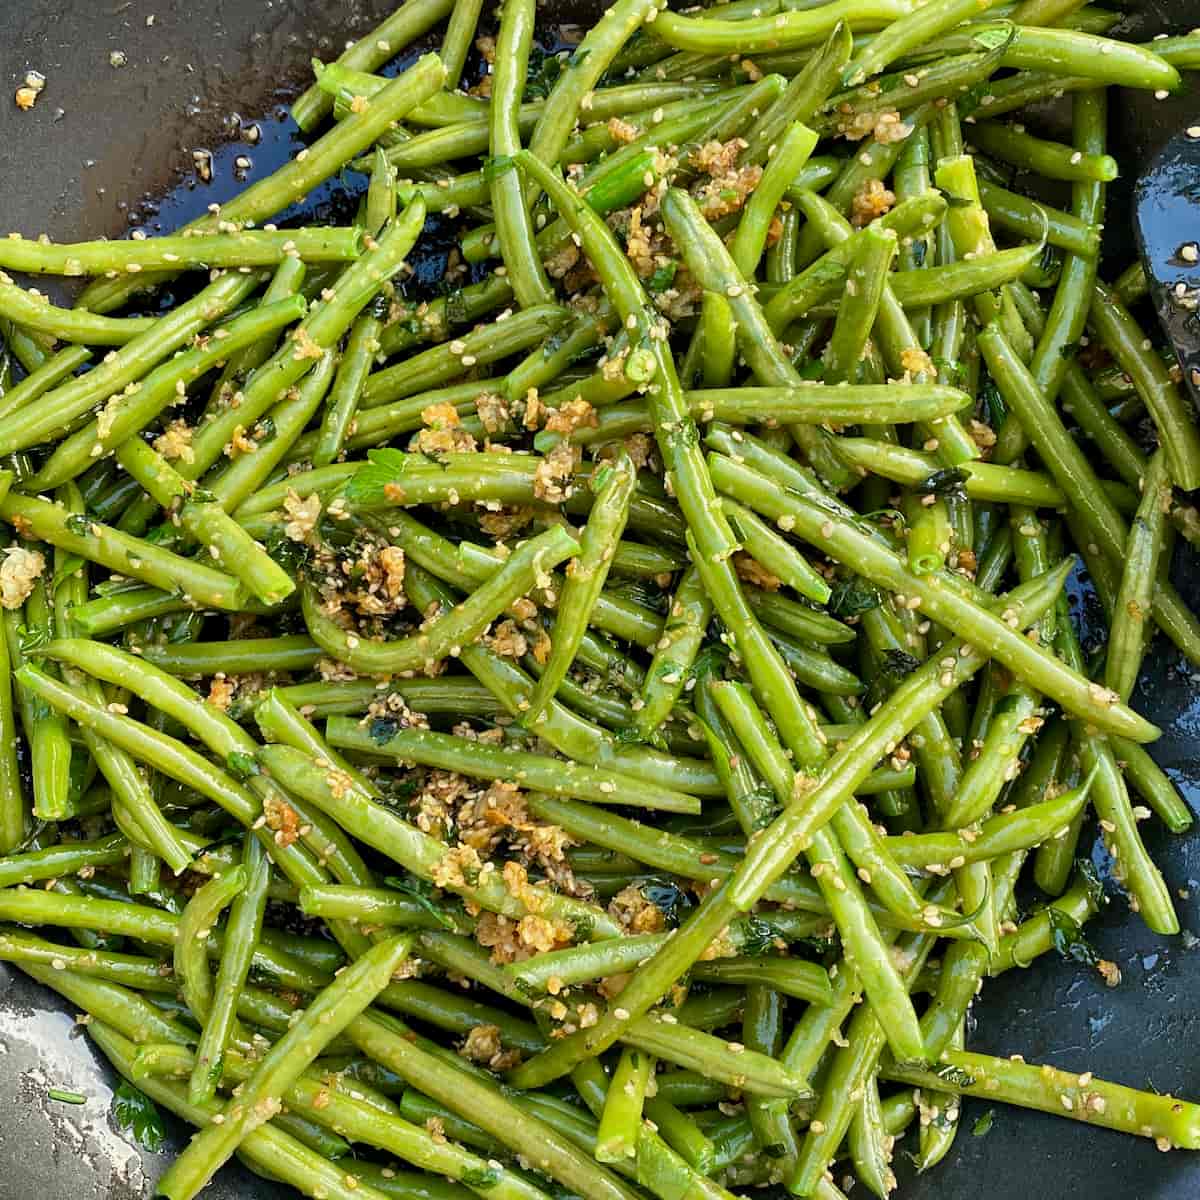 tossed green beans in olive oil, butter, breadcrumbs, garlic and herbs